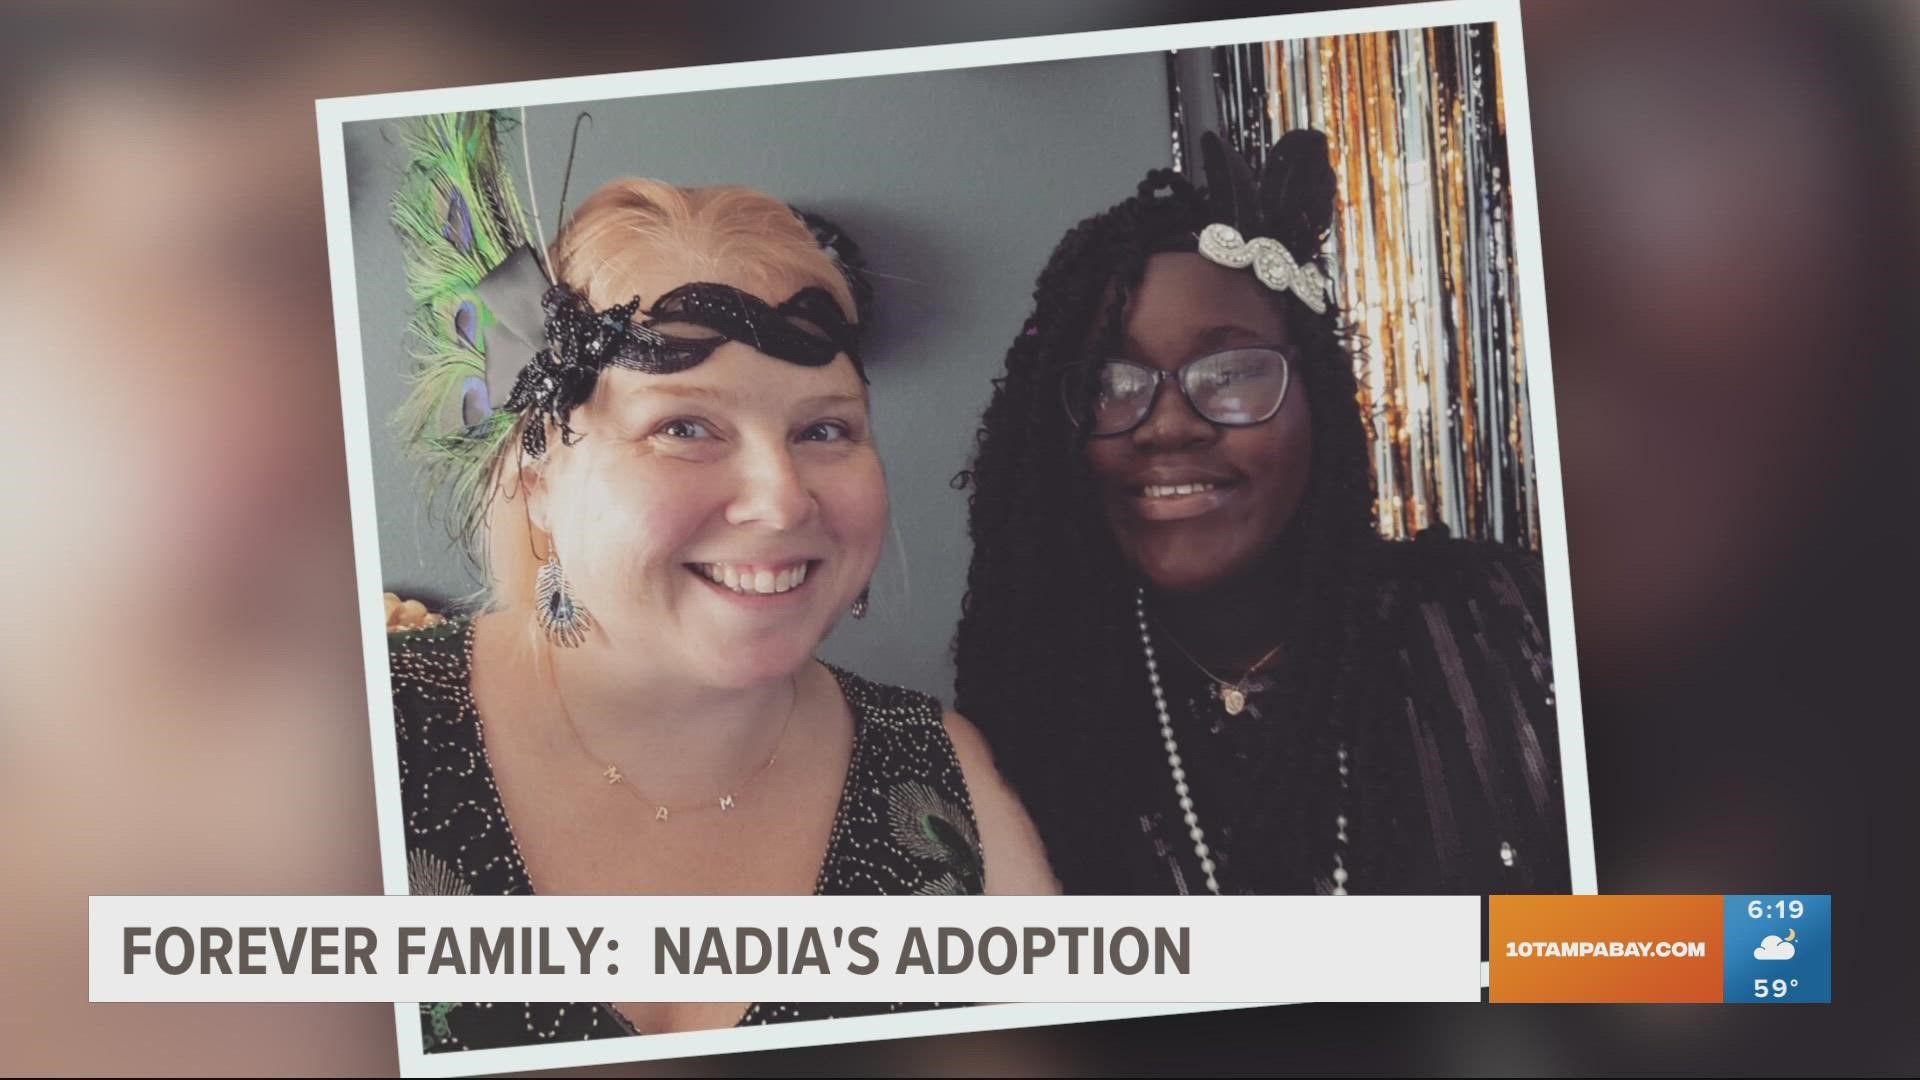 Nadia's mom Kerry credits seeing the teen's story on 10 Tampa Bay's "Forever Family" segment.